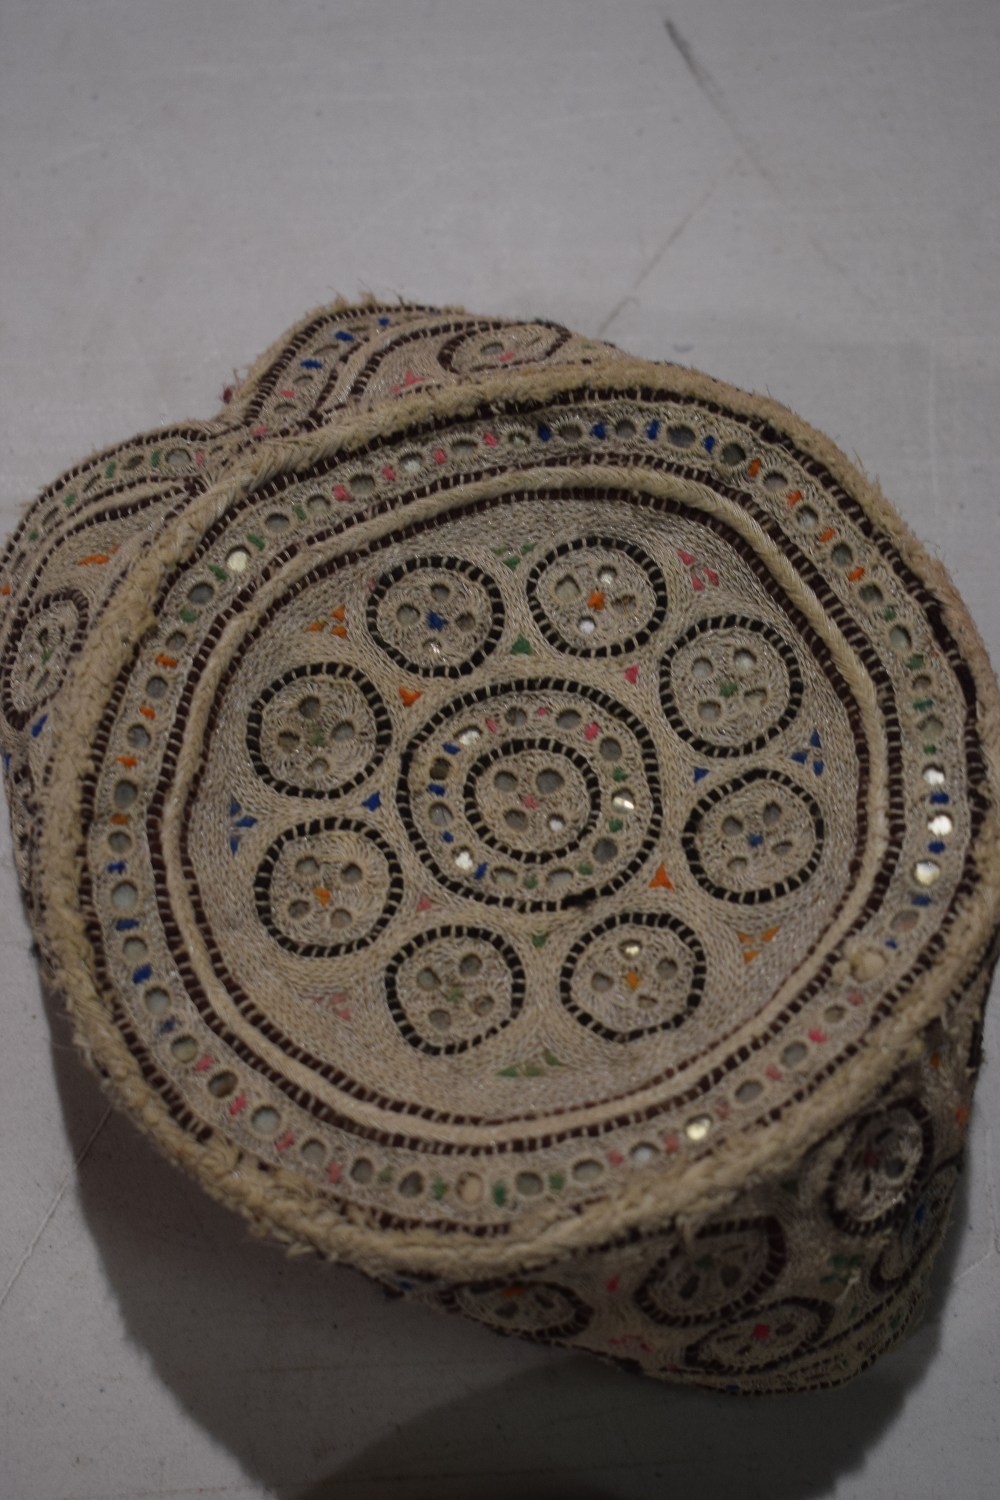 Six Sindhi Baluchi topi (caps), embroidered in coloured silks, metal threads and shisha-work ( - Image 17 of 30